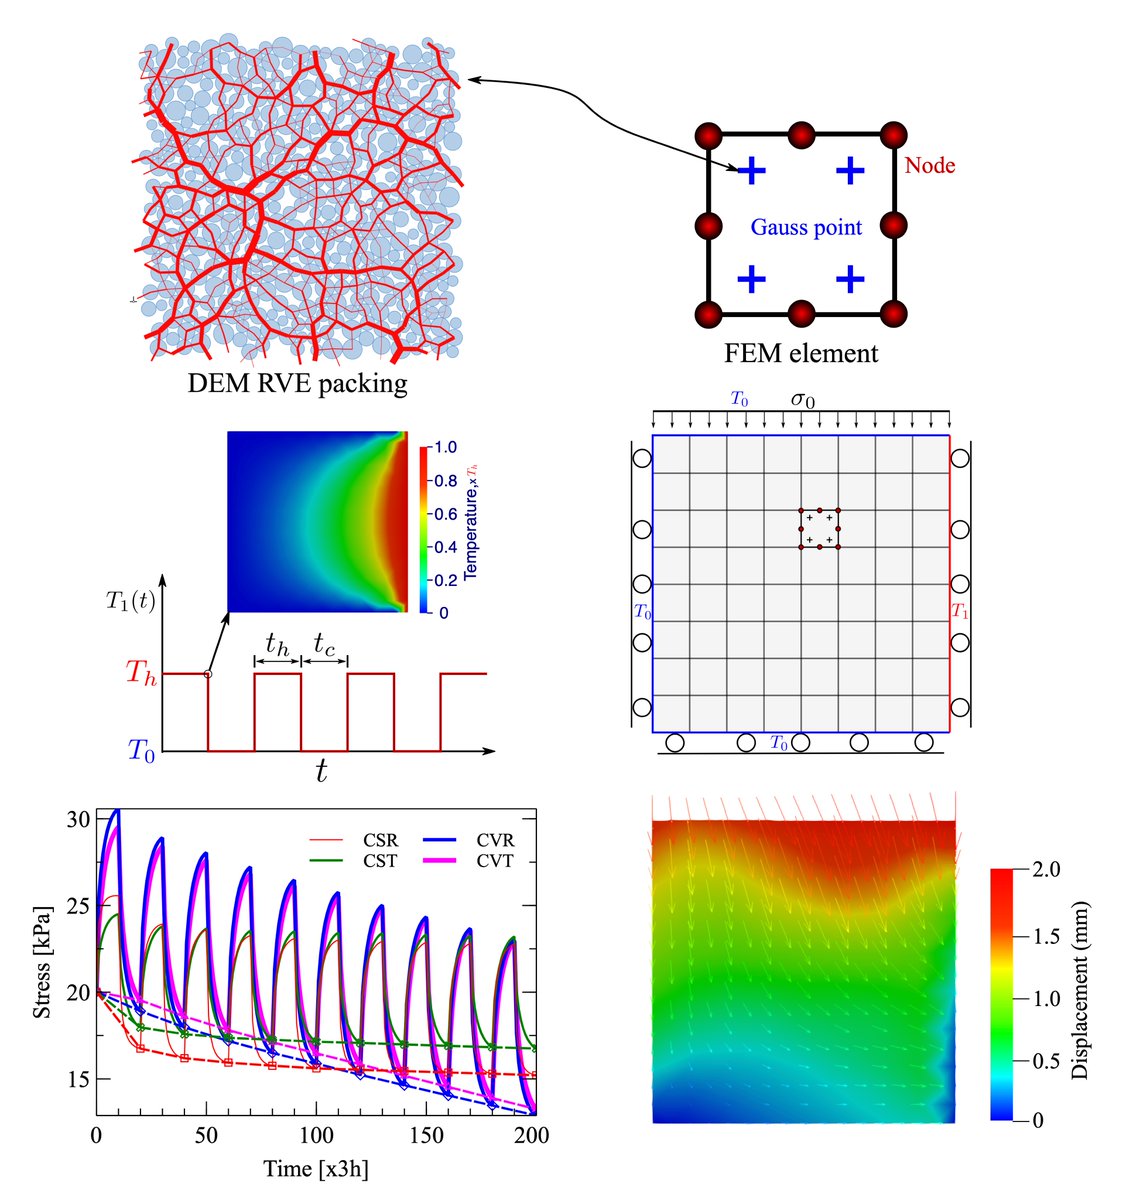 New paper by @swayzhao on #MultiscaleModeling of thermo-mechanical behavior of #GranularMedia accepted by #CMAME @Elsevier_Eng. Dual FEMs (for T & M) hierarchically coupled with DEM considering grain contact heat conduction at shared #GaussPoint to solve BVPs. #ResearchInLockdown